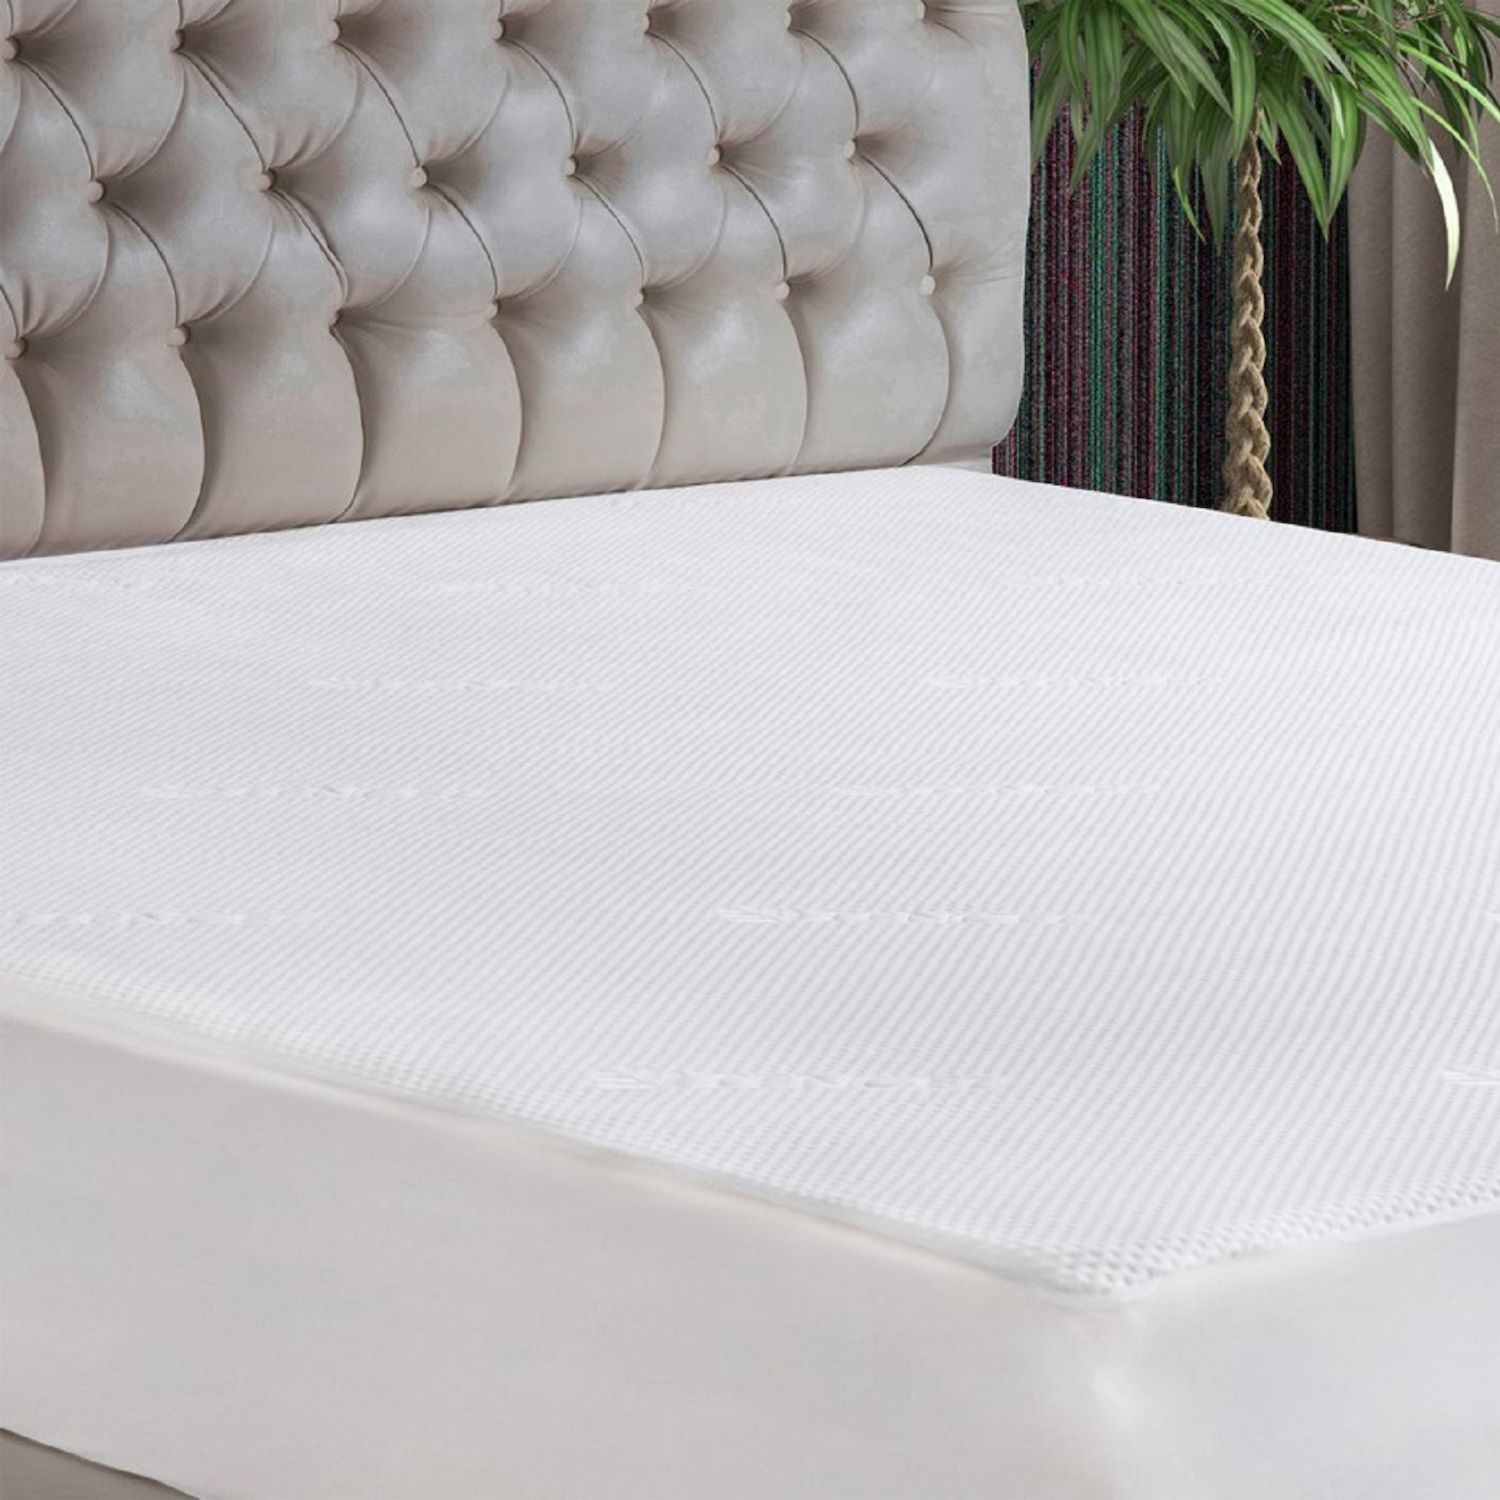 Terry Waterproof Mattress Cover Anti-mite Breathable Hypoallergenic Bed  Protection Pad White Mattress Protector Bed Bug Suit 1PC